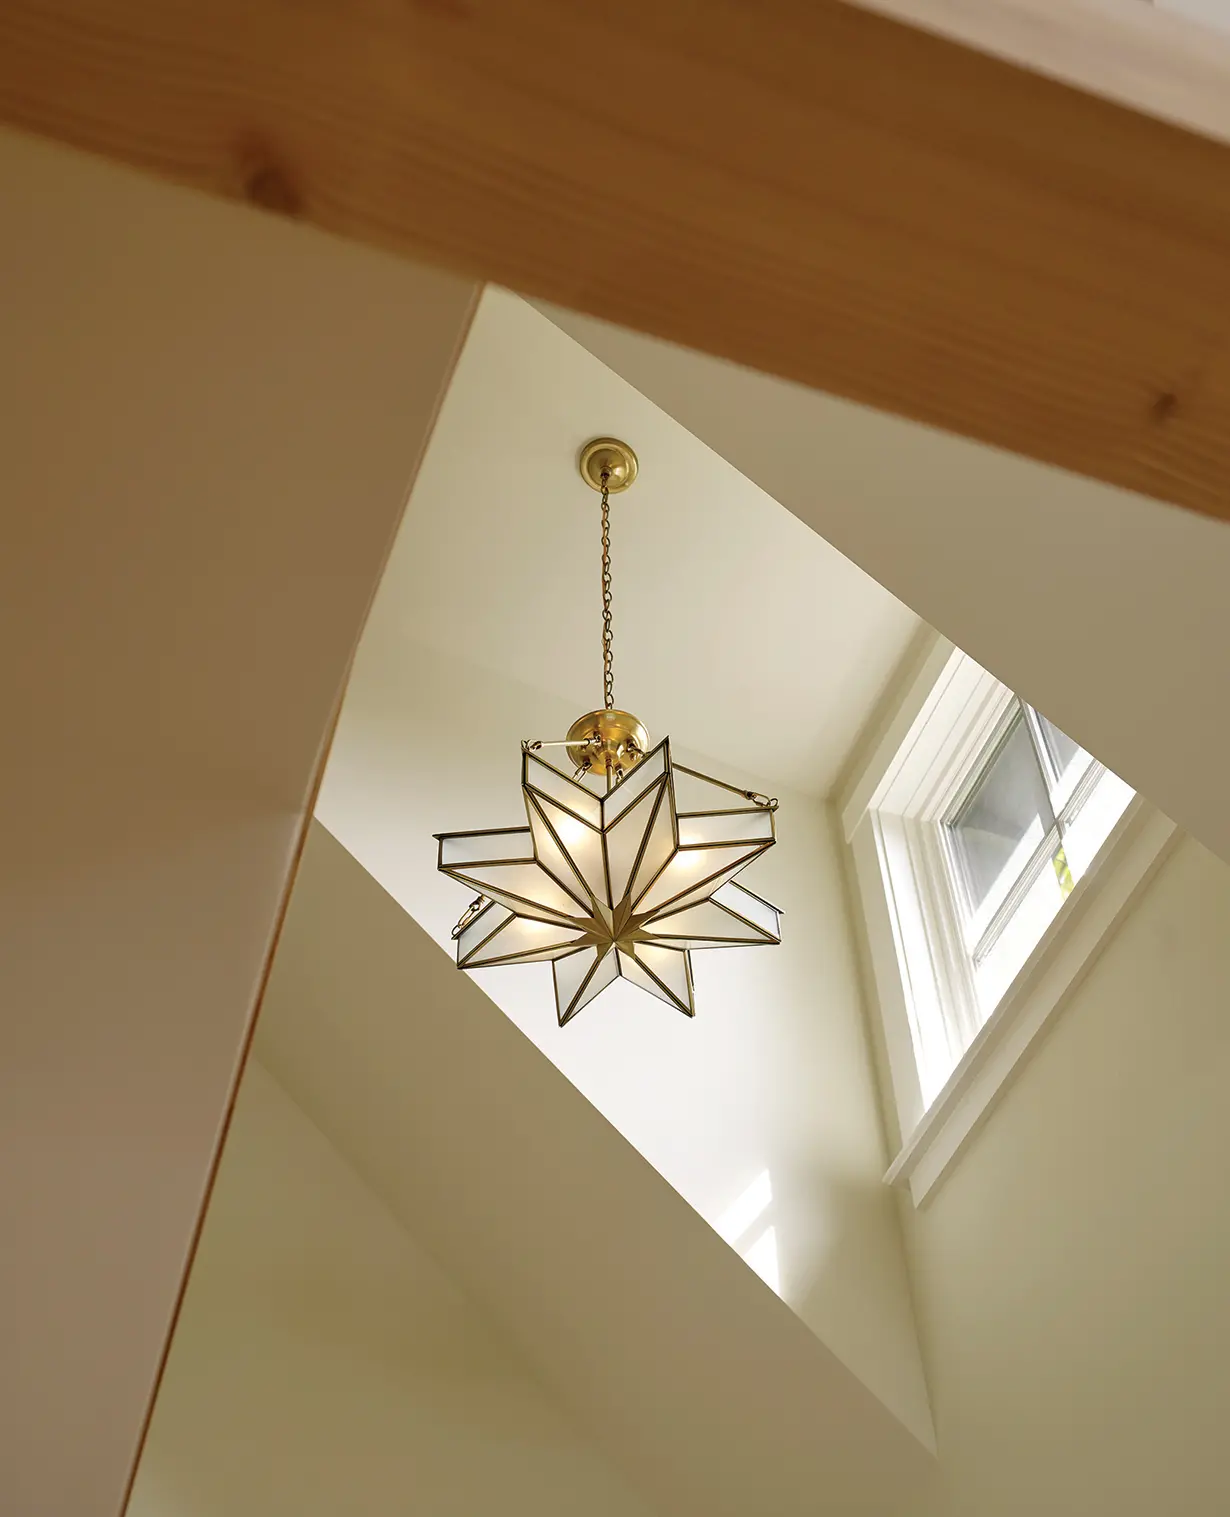 Side view of star chandelier